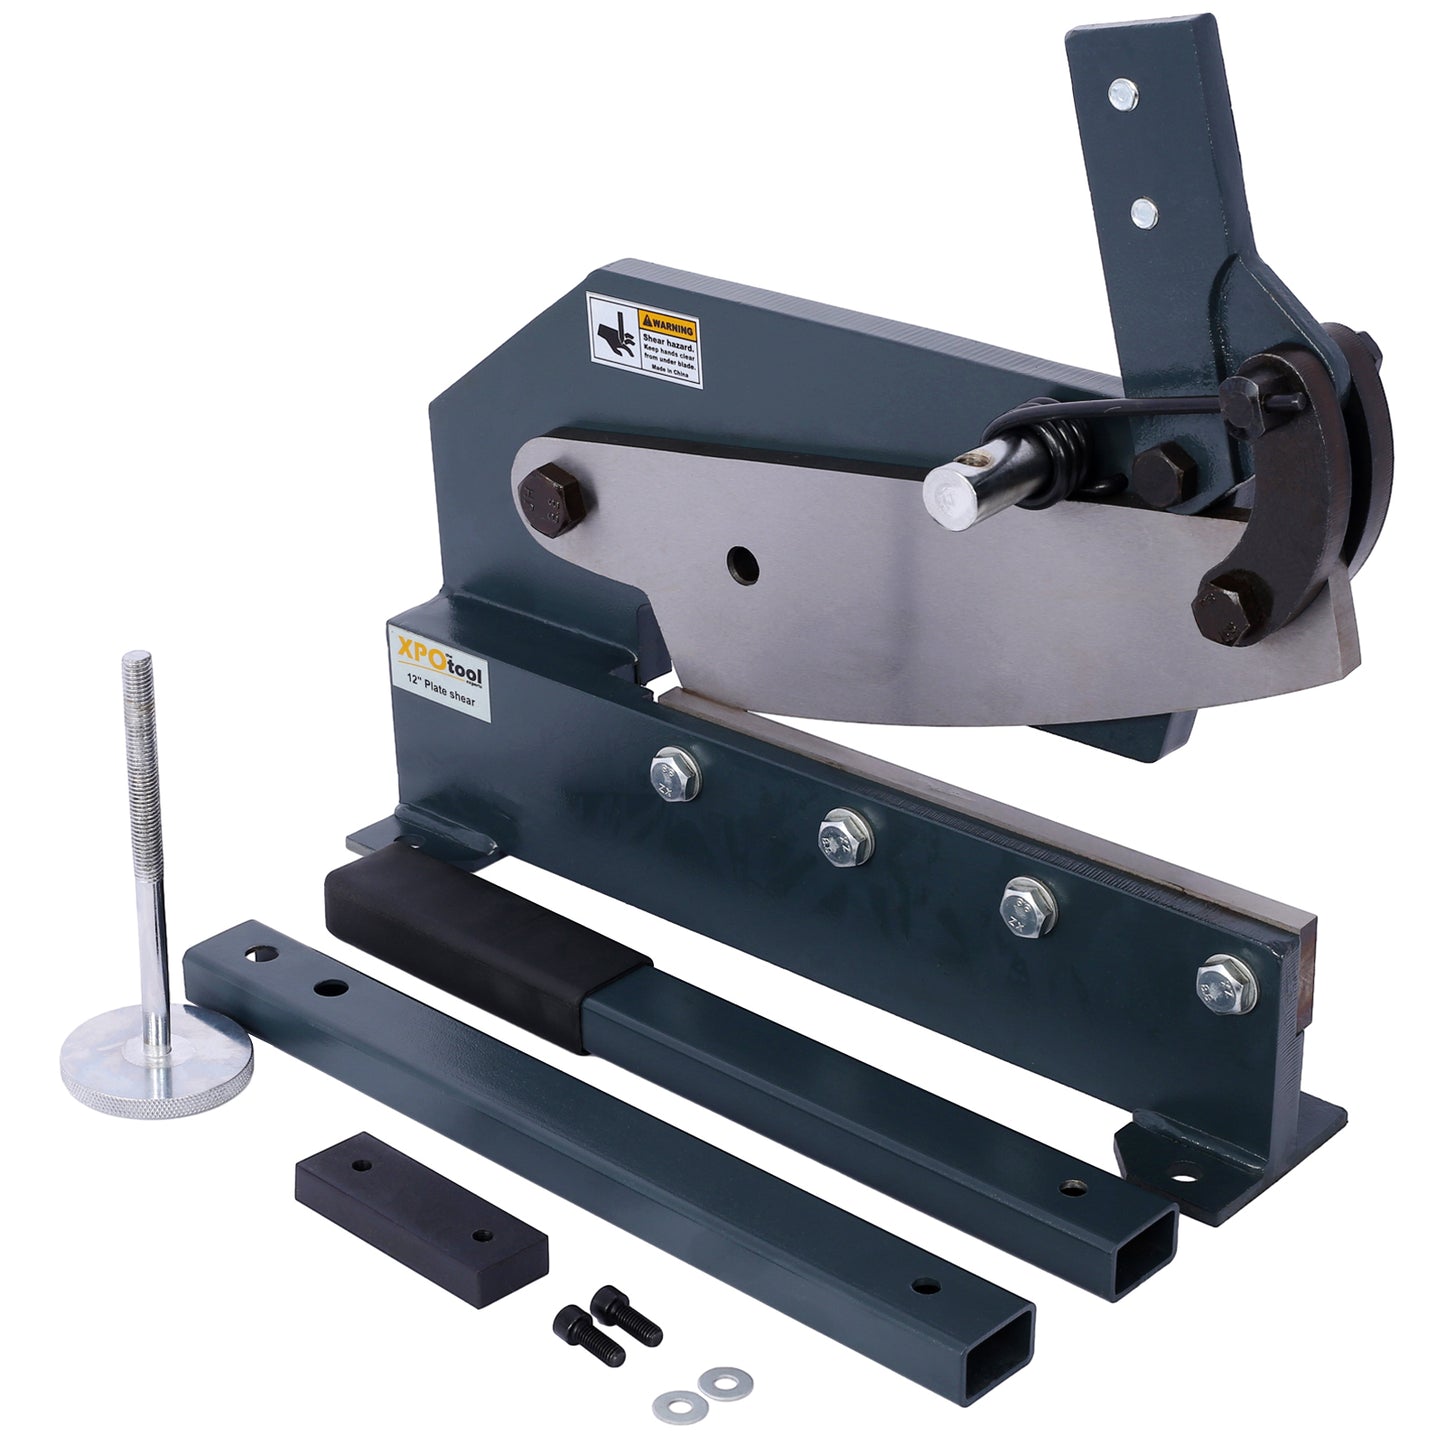 Industrial 12-Inch Sheet Metal Plate Shear, Solid Construction Mounting Type Metal Shear, High Precision Manual Hand Plate Shear